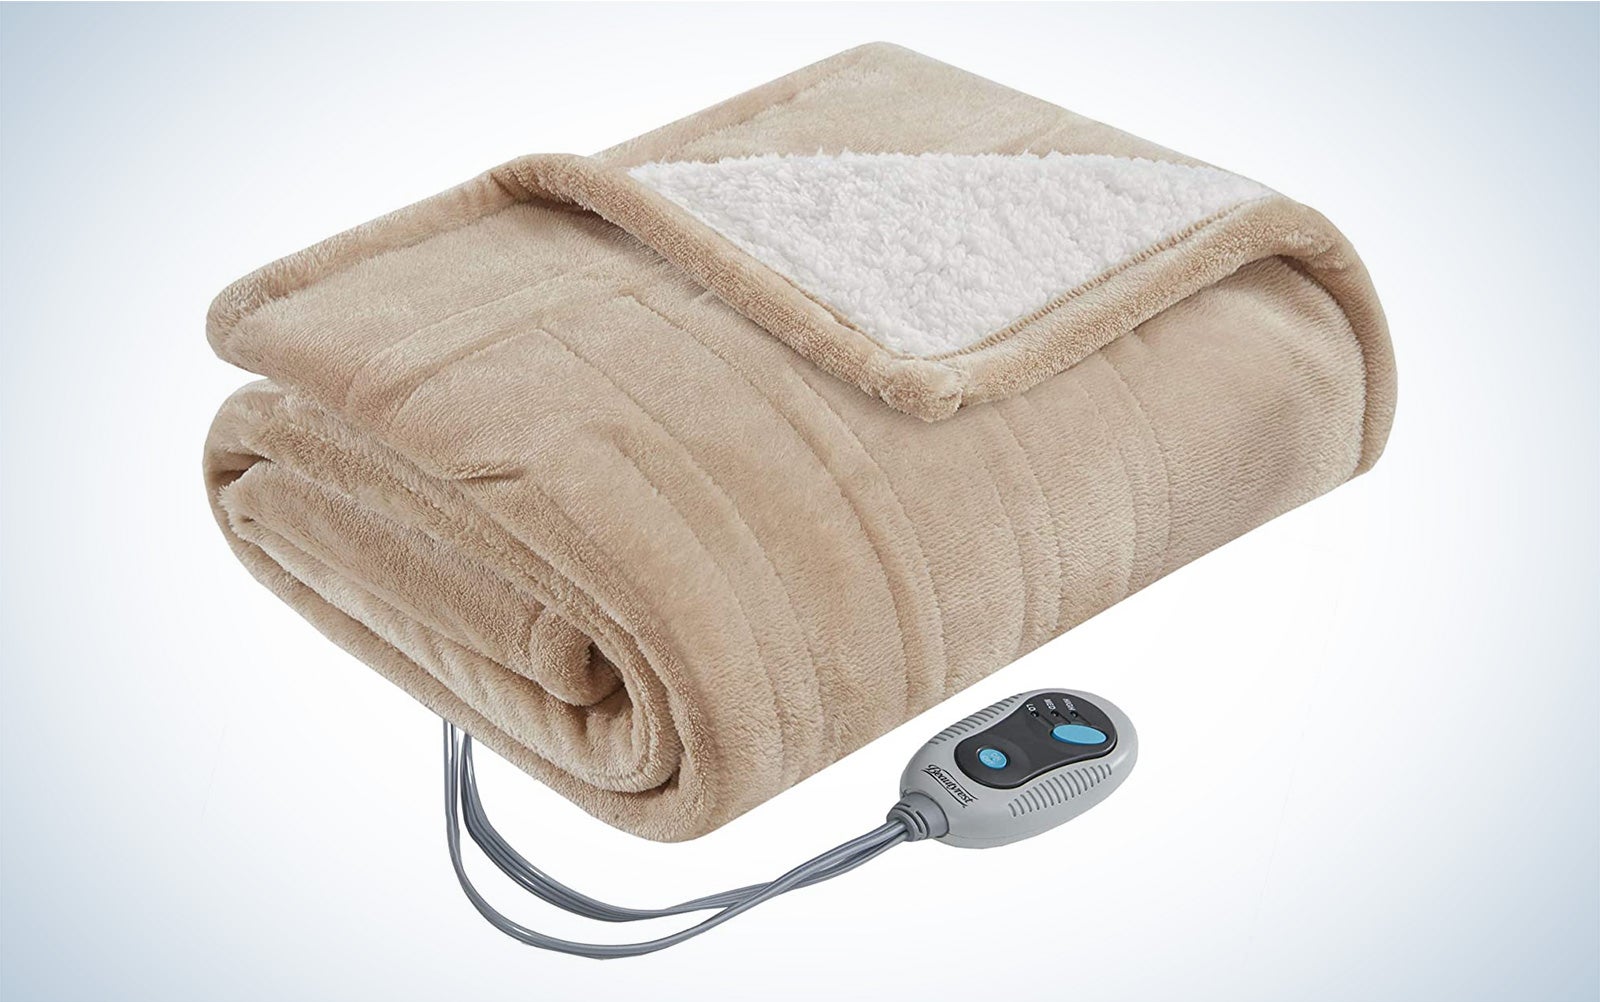 Beautyrest reversible heated blanket on a plain background as one of the best heated blankets